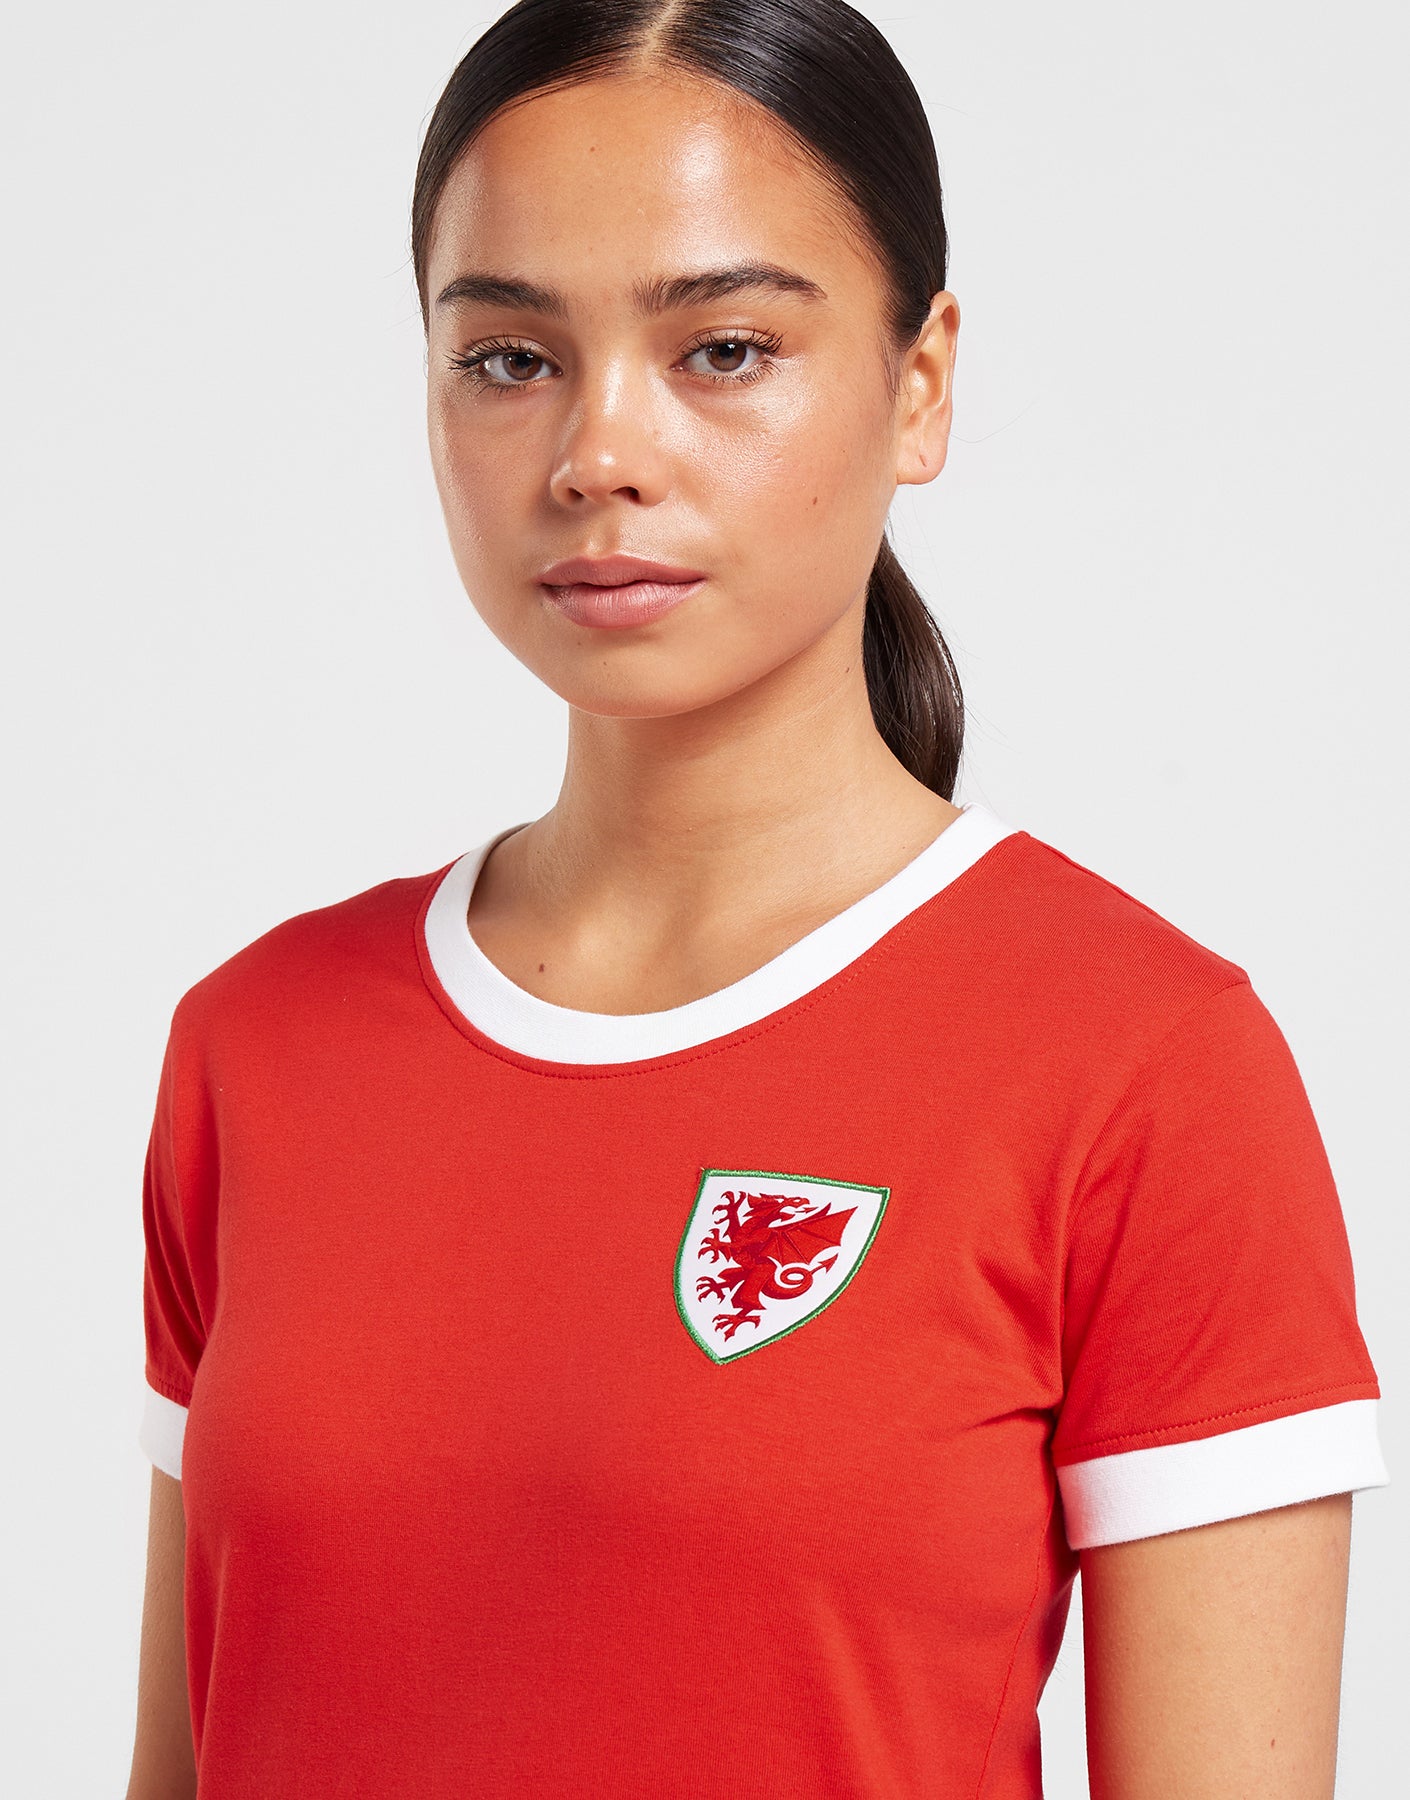 Official Team Wales Women's Ringer T-Shirt - The World Football Store